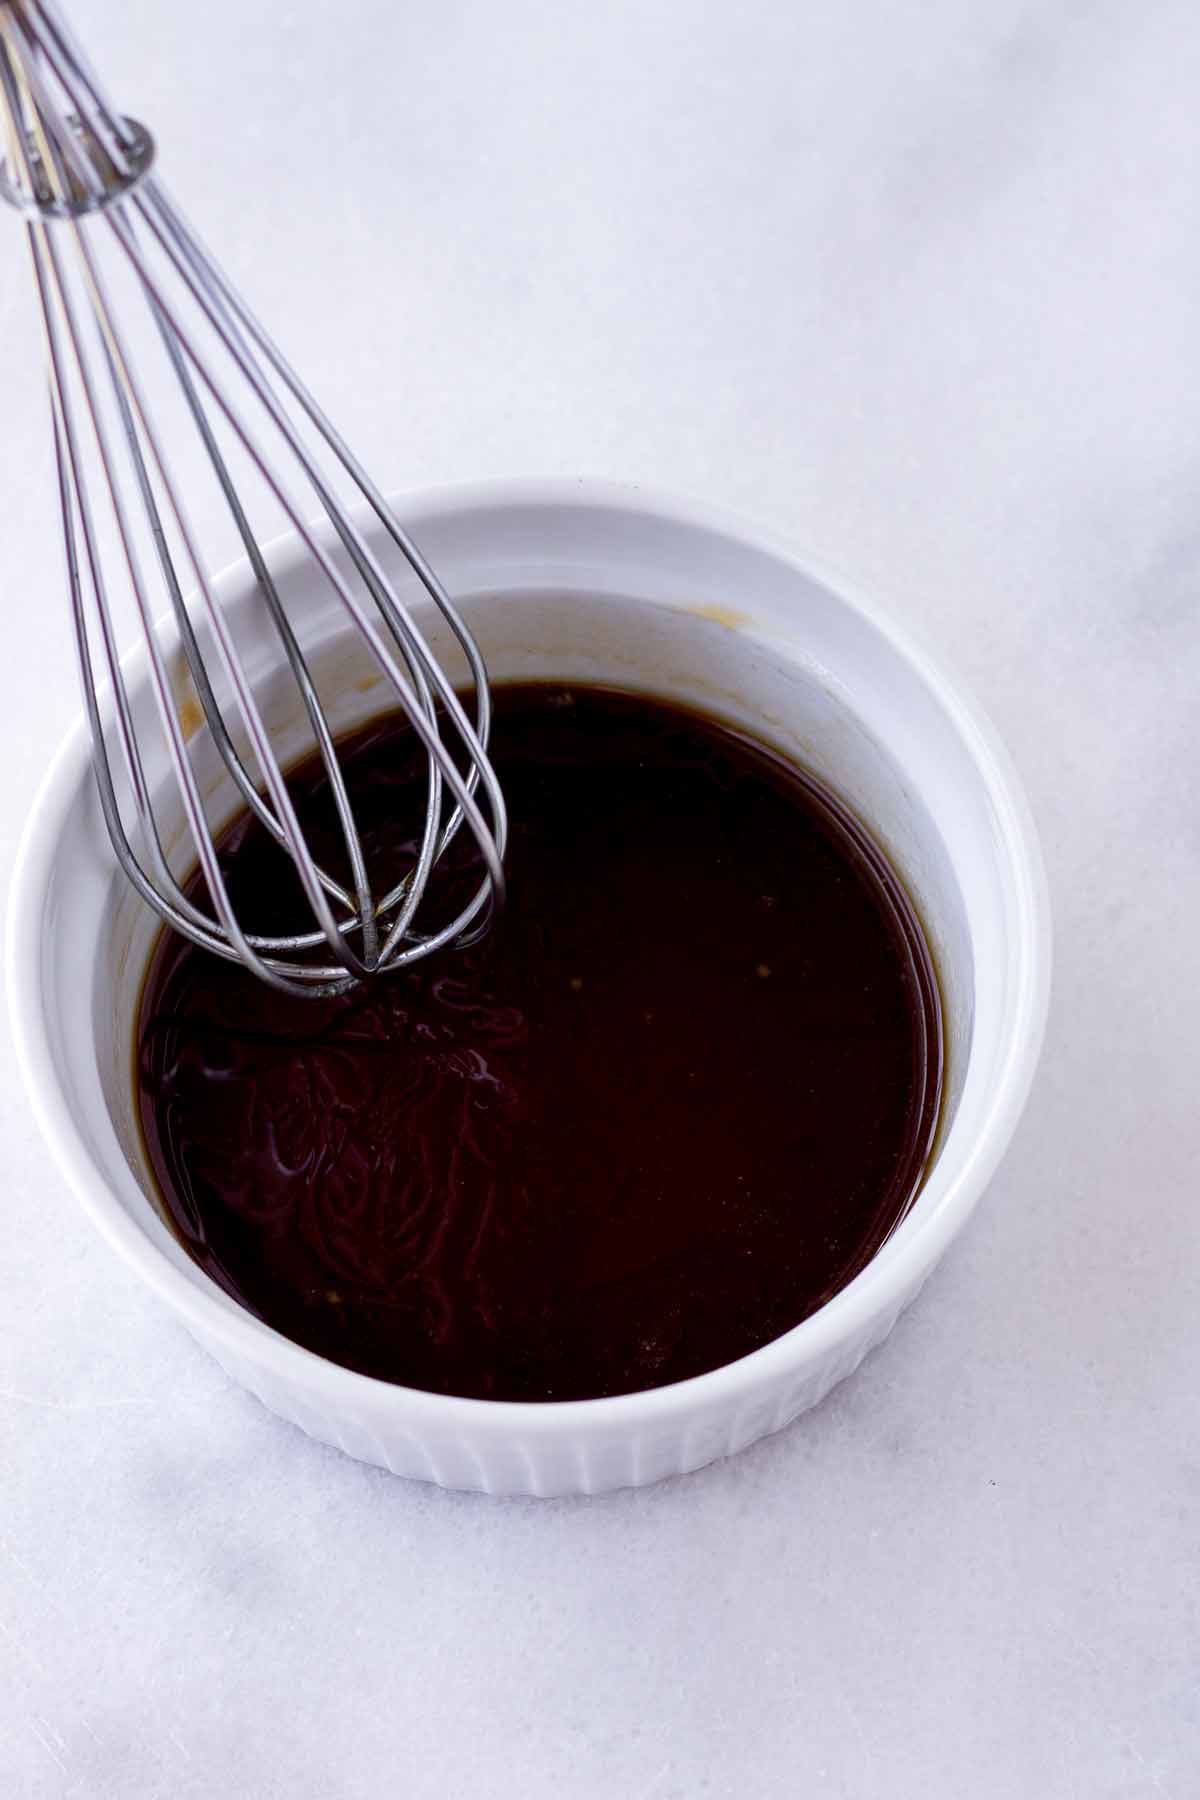 soy sauce and oyster sauce mix in a ramekin with a whisk